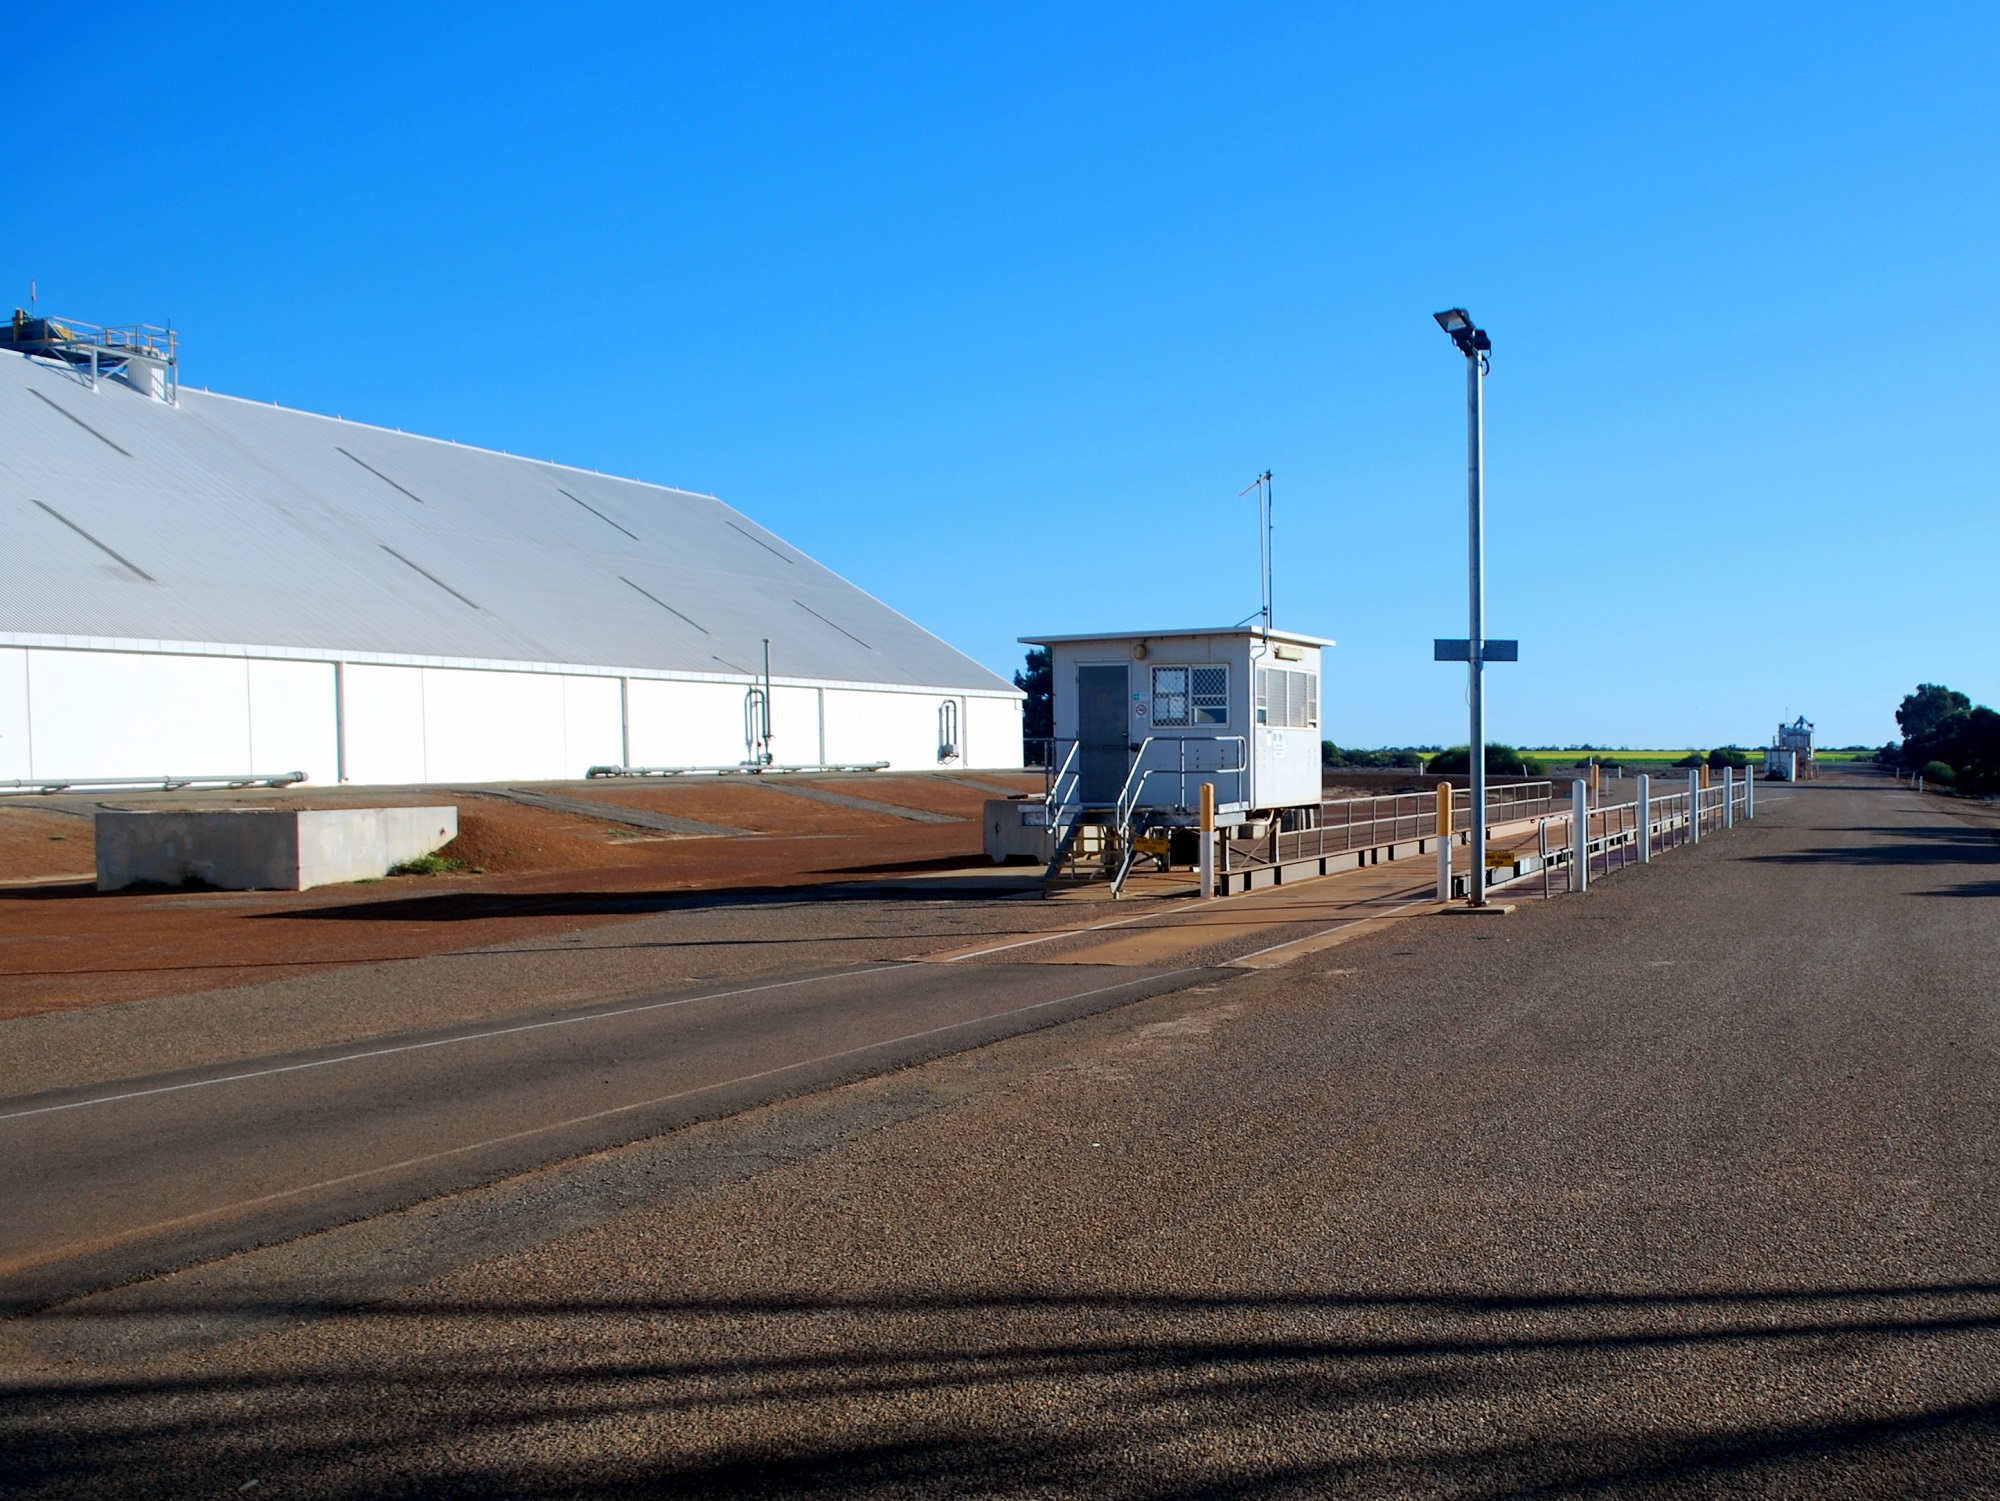 Image of CBH Yuna sample hut with blue sky and horizontal storage shed in the background, bitumen road in the foreground